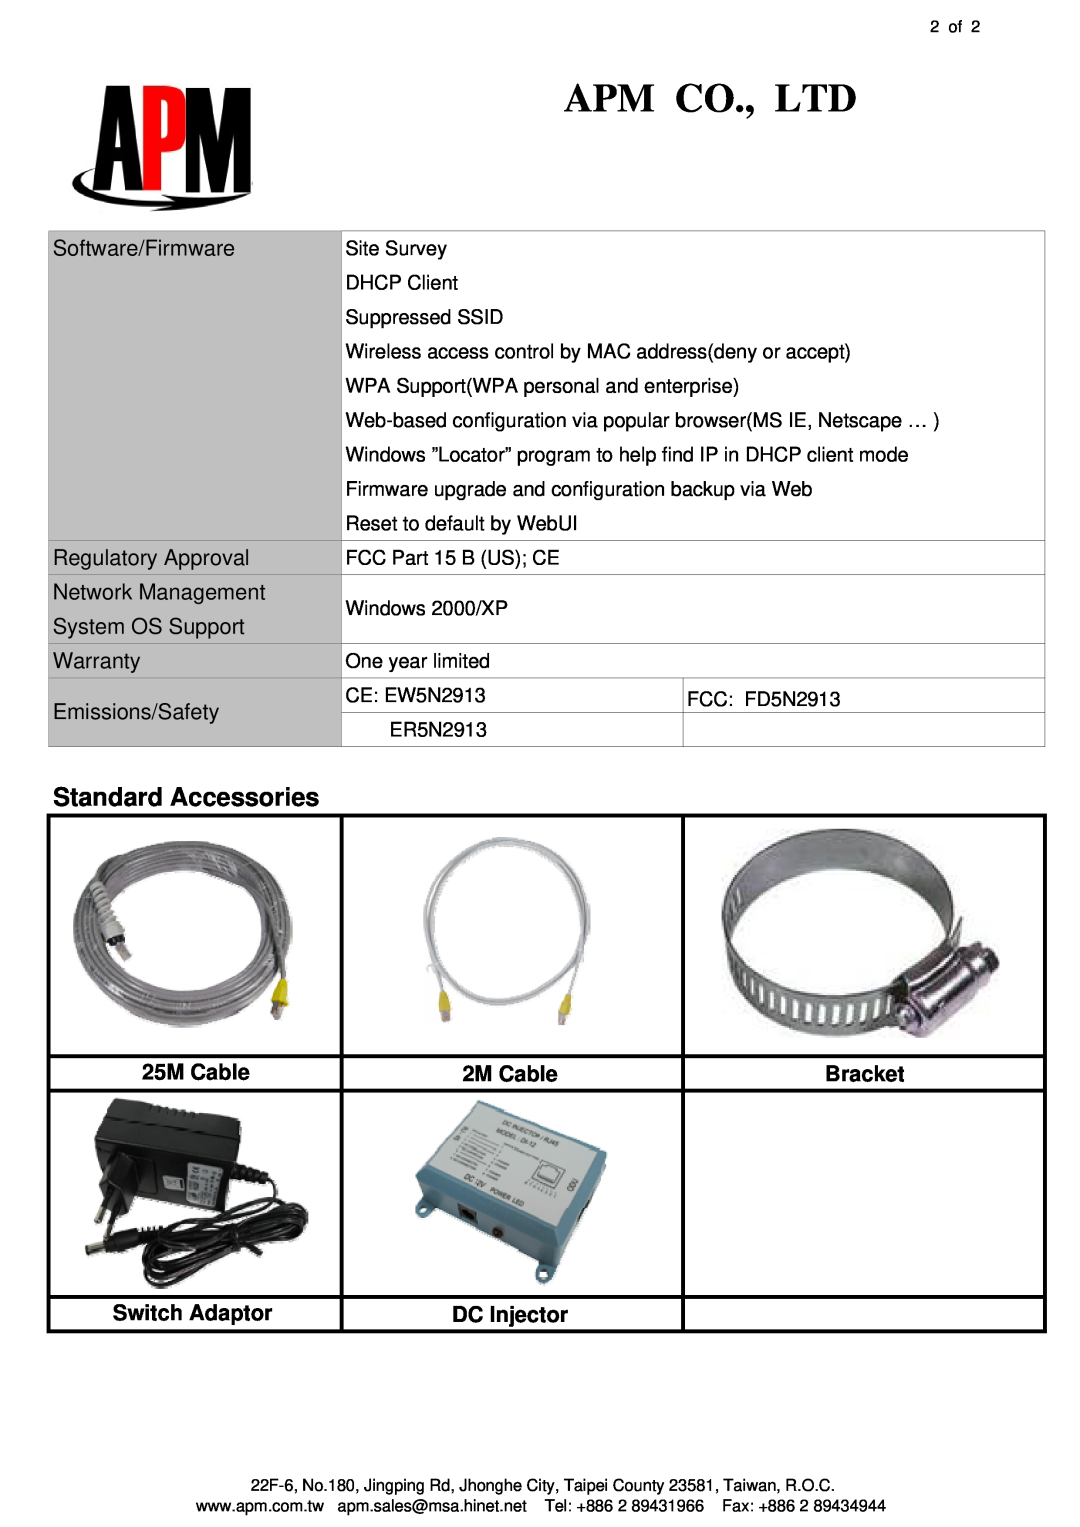 APM 24005G manual Standard Accessories, 25M Cable, 2M Cable, Bracket, Switch Adaptor, DC Injector 